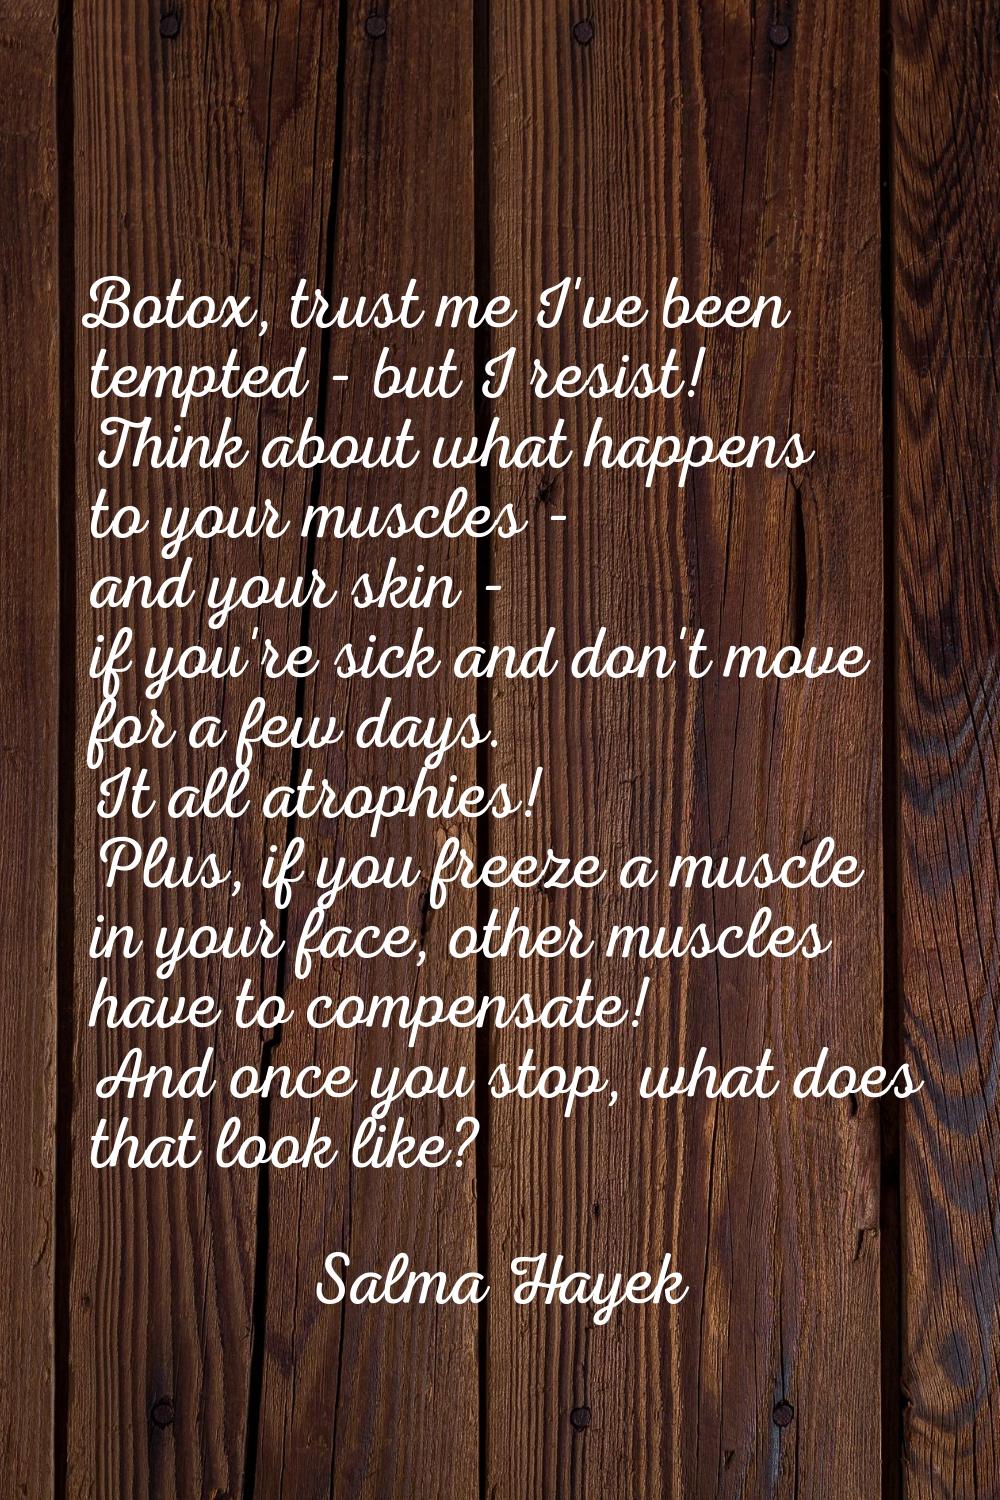 Botox, trust me I've been tempted - but I resist! Think about what happens to your muscles - and yo